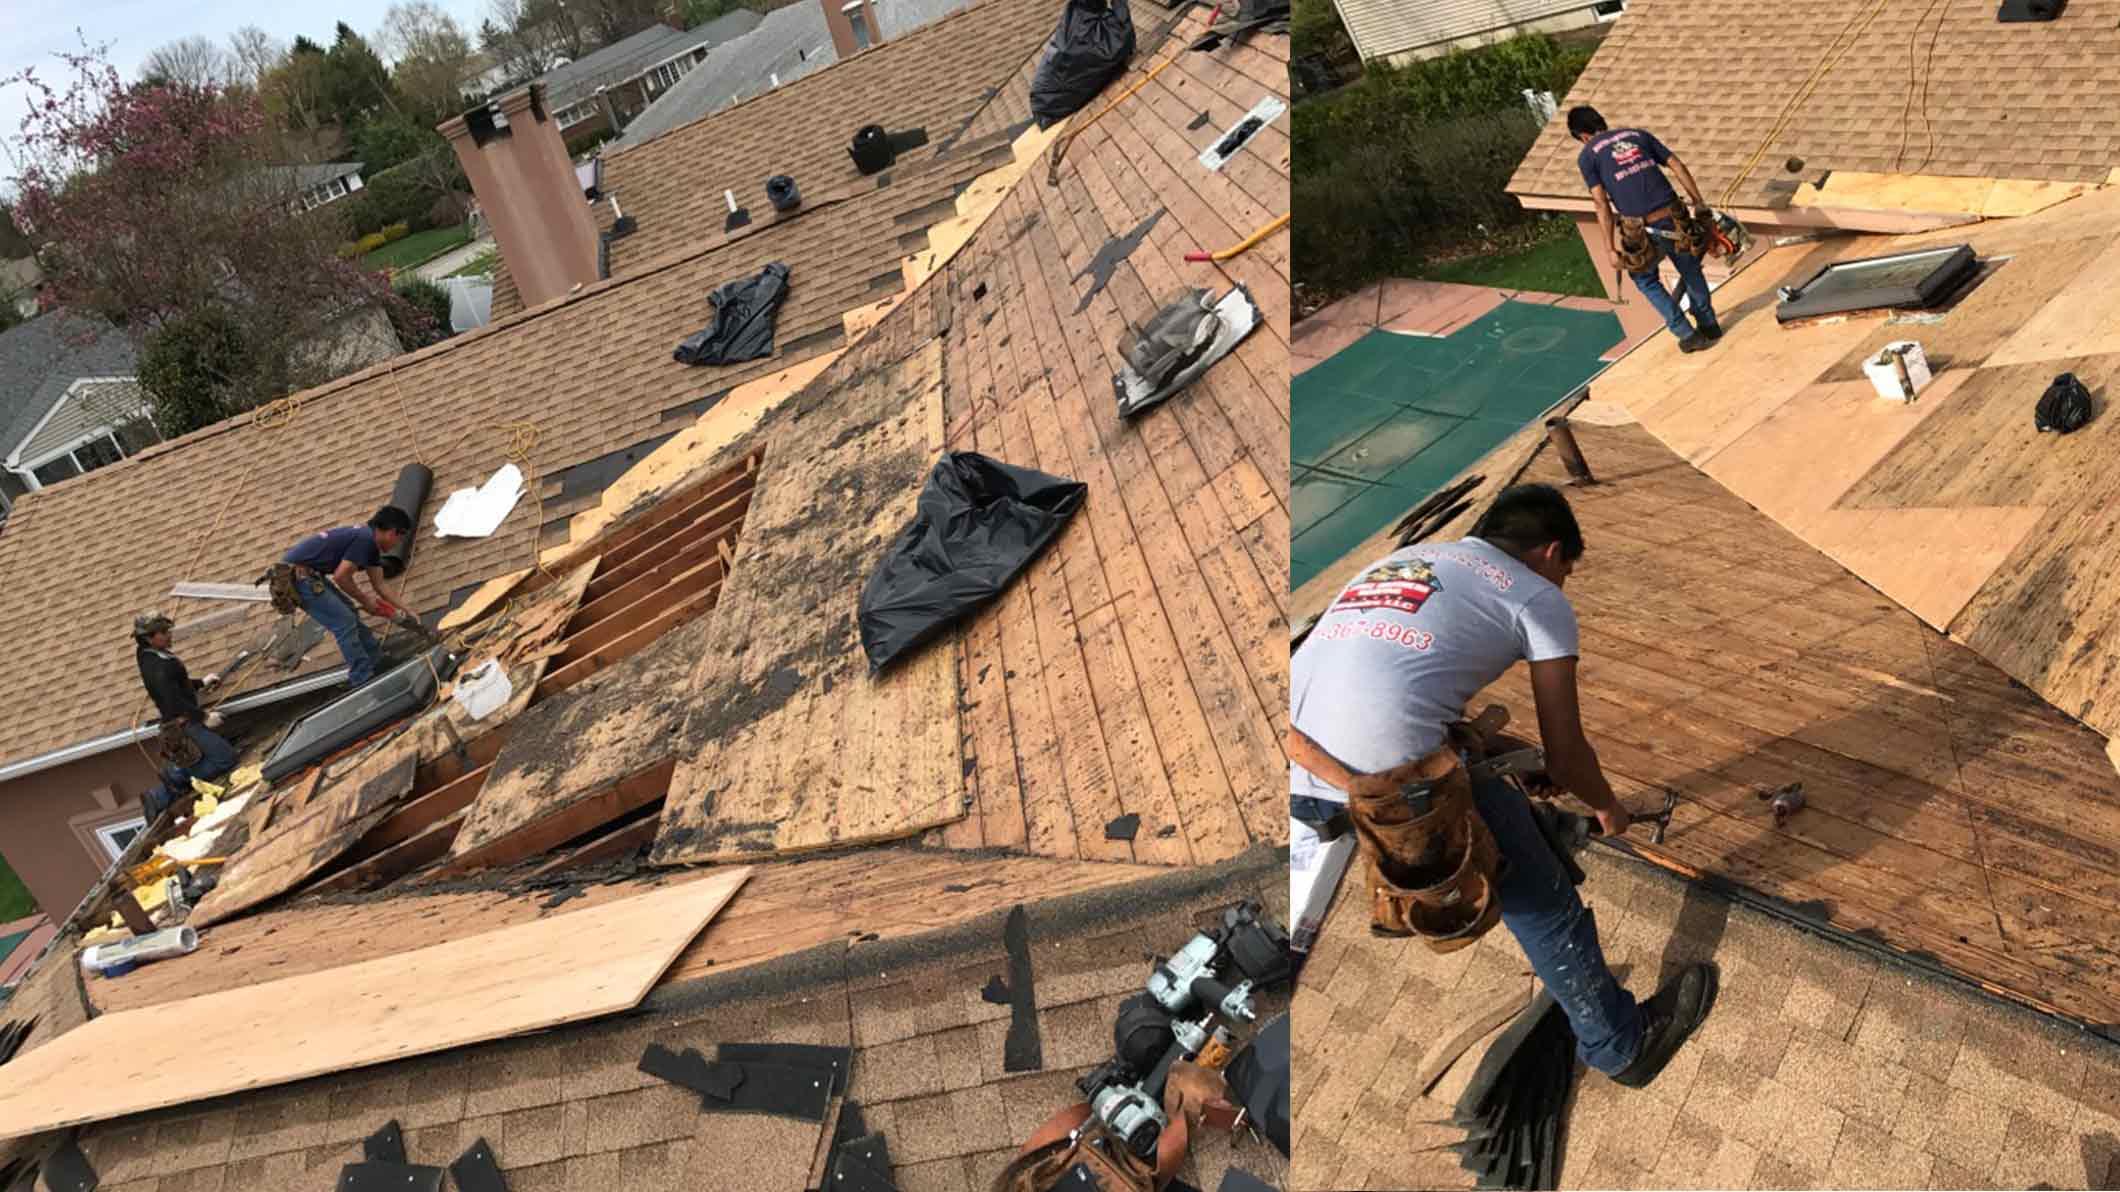 Residential Roofing contractors specialist in shingles roof near me Three Brothers Roofing Contractors, Flat Roof Leak Repair NJ Palisades Park (201)367-8963